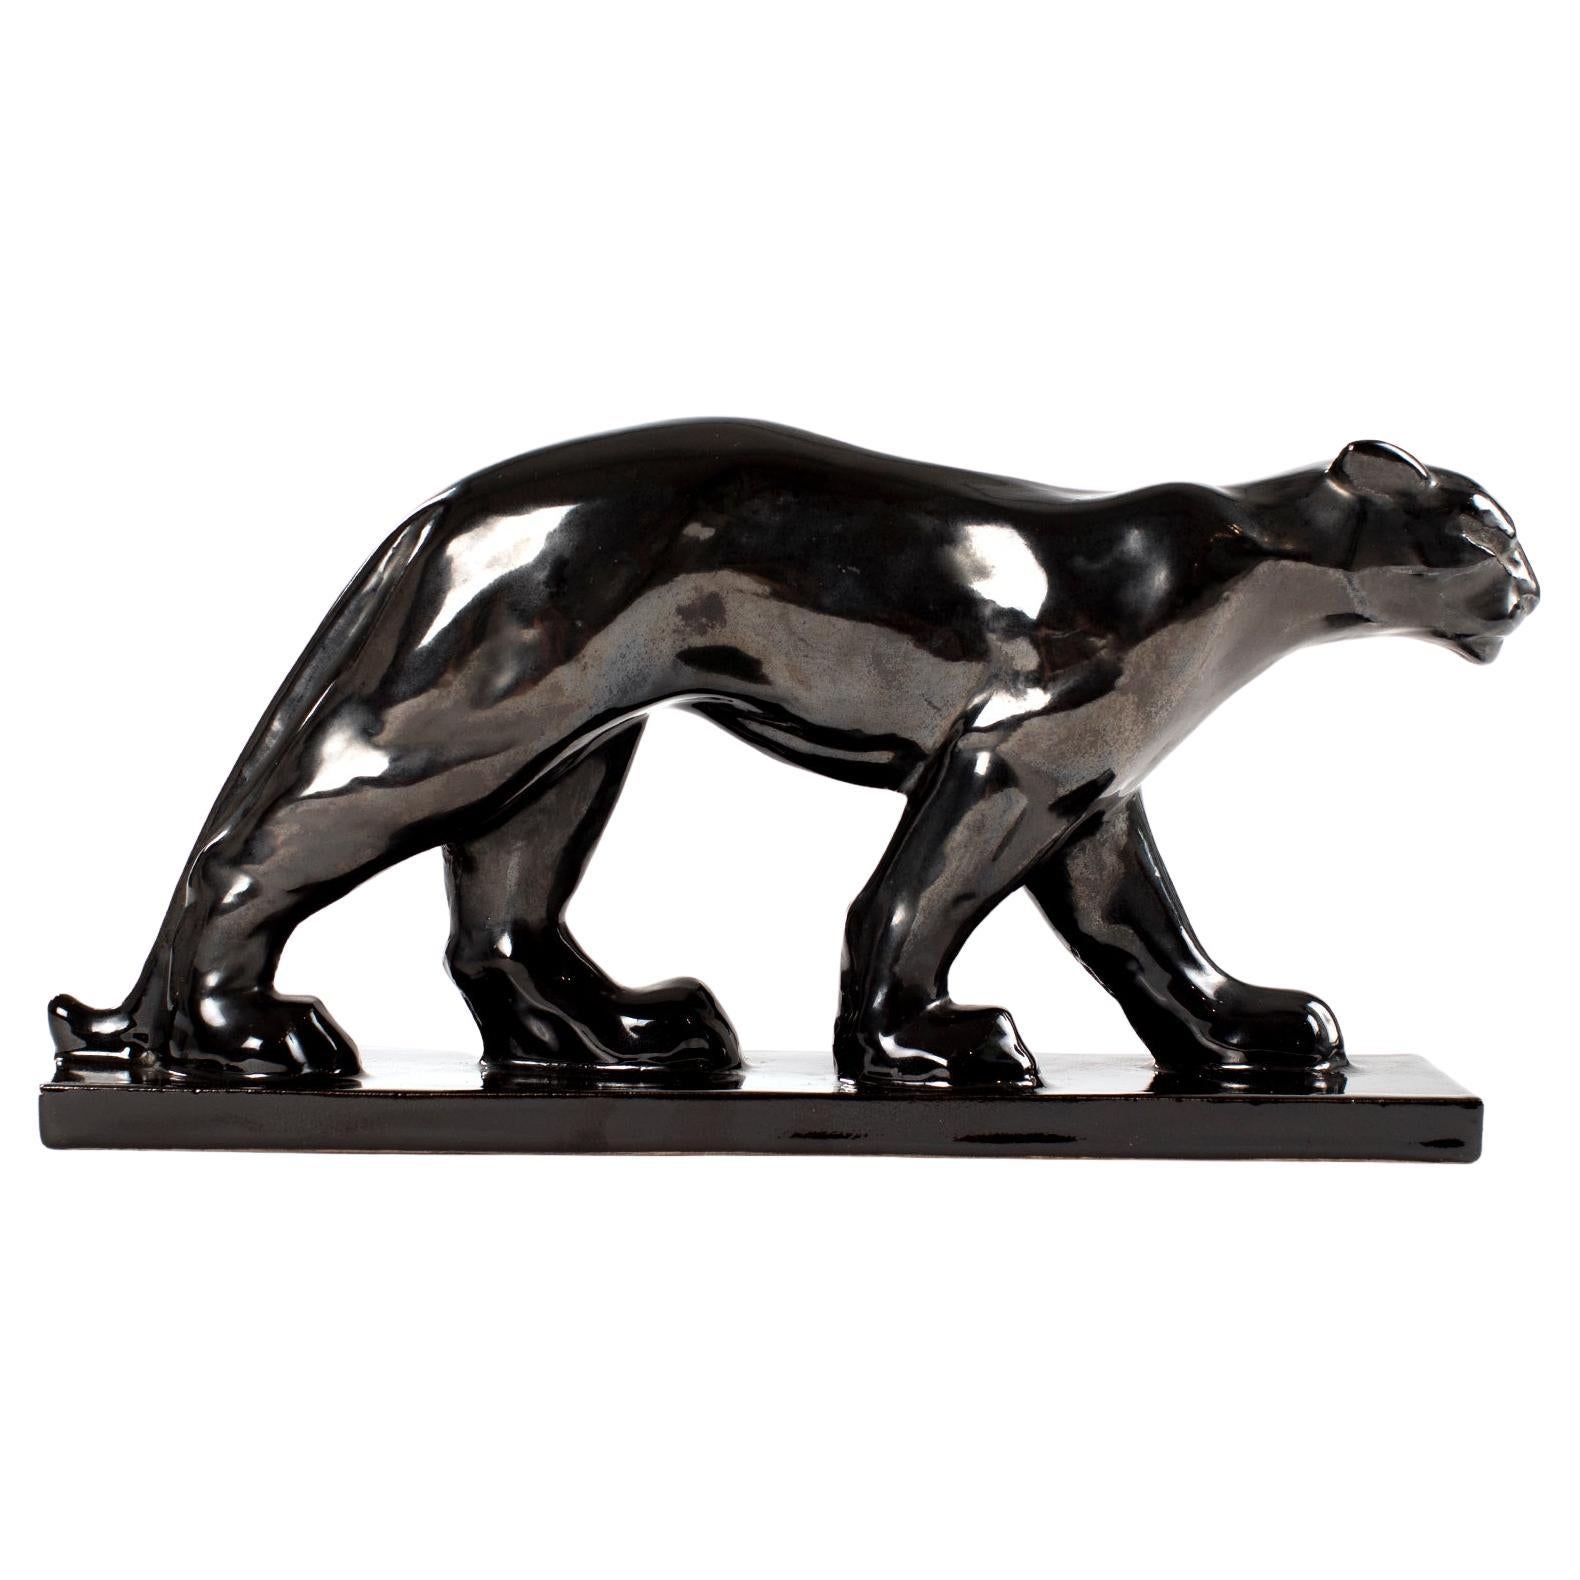 French, black Art Deco ceramique panther sculpture, 1930s.

Exptrem cubist looking object, very rare as ceramic.
The strong look of the object comes from the very well realized dynamics of the object, the exaggerated cubist shape and the black